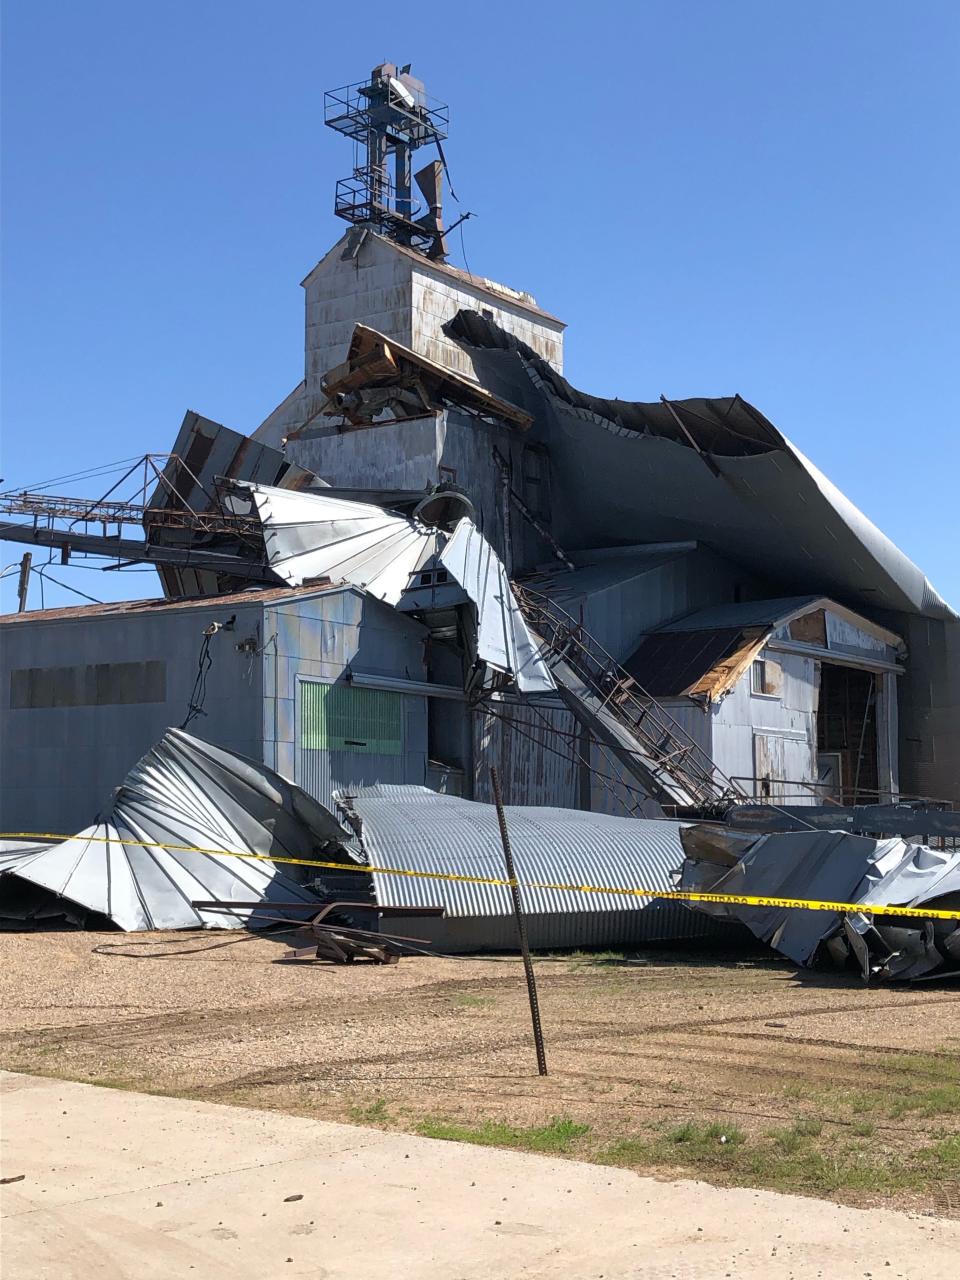 The Tripp grain elevator was destroyed in Thursday's storms when wind speeds reached 107 mph.